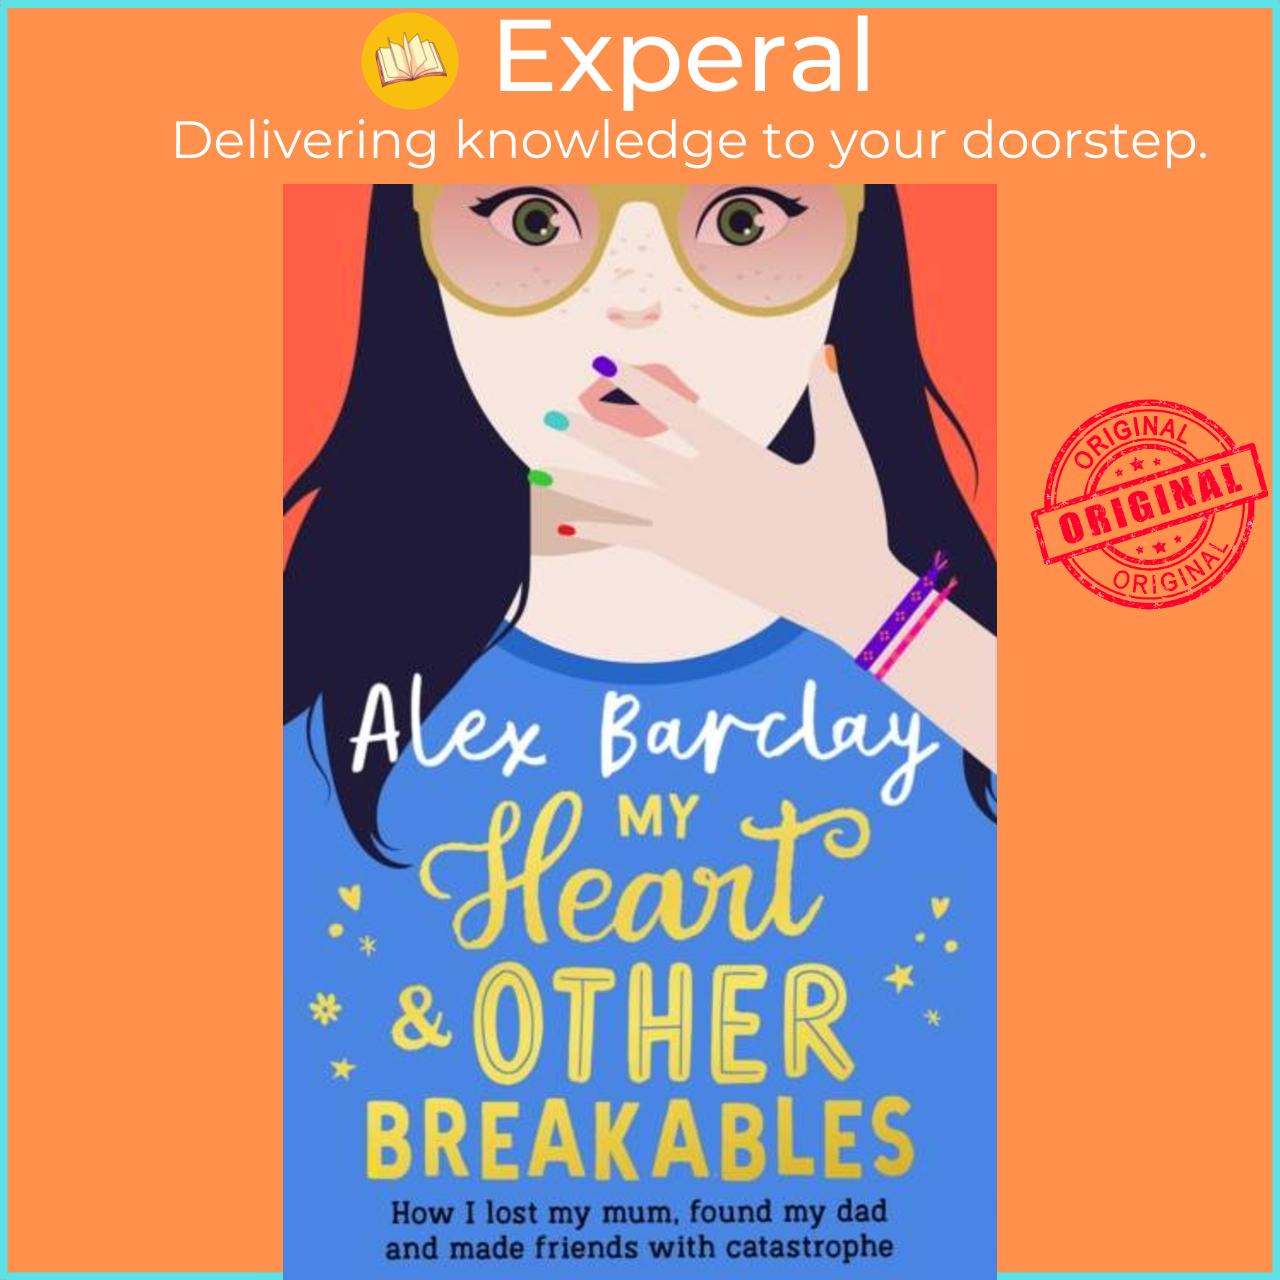 Sách - My Heart & Other Breakables: How I lost my mum, found my dad, and made fr by Alex Barclay (UK edition, paperback)